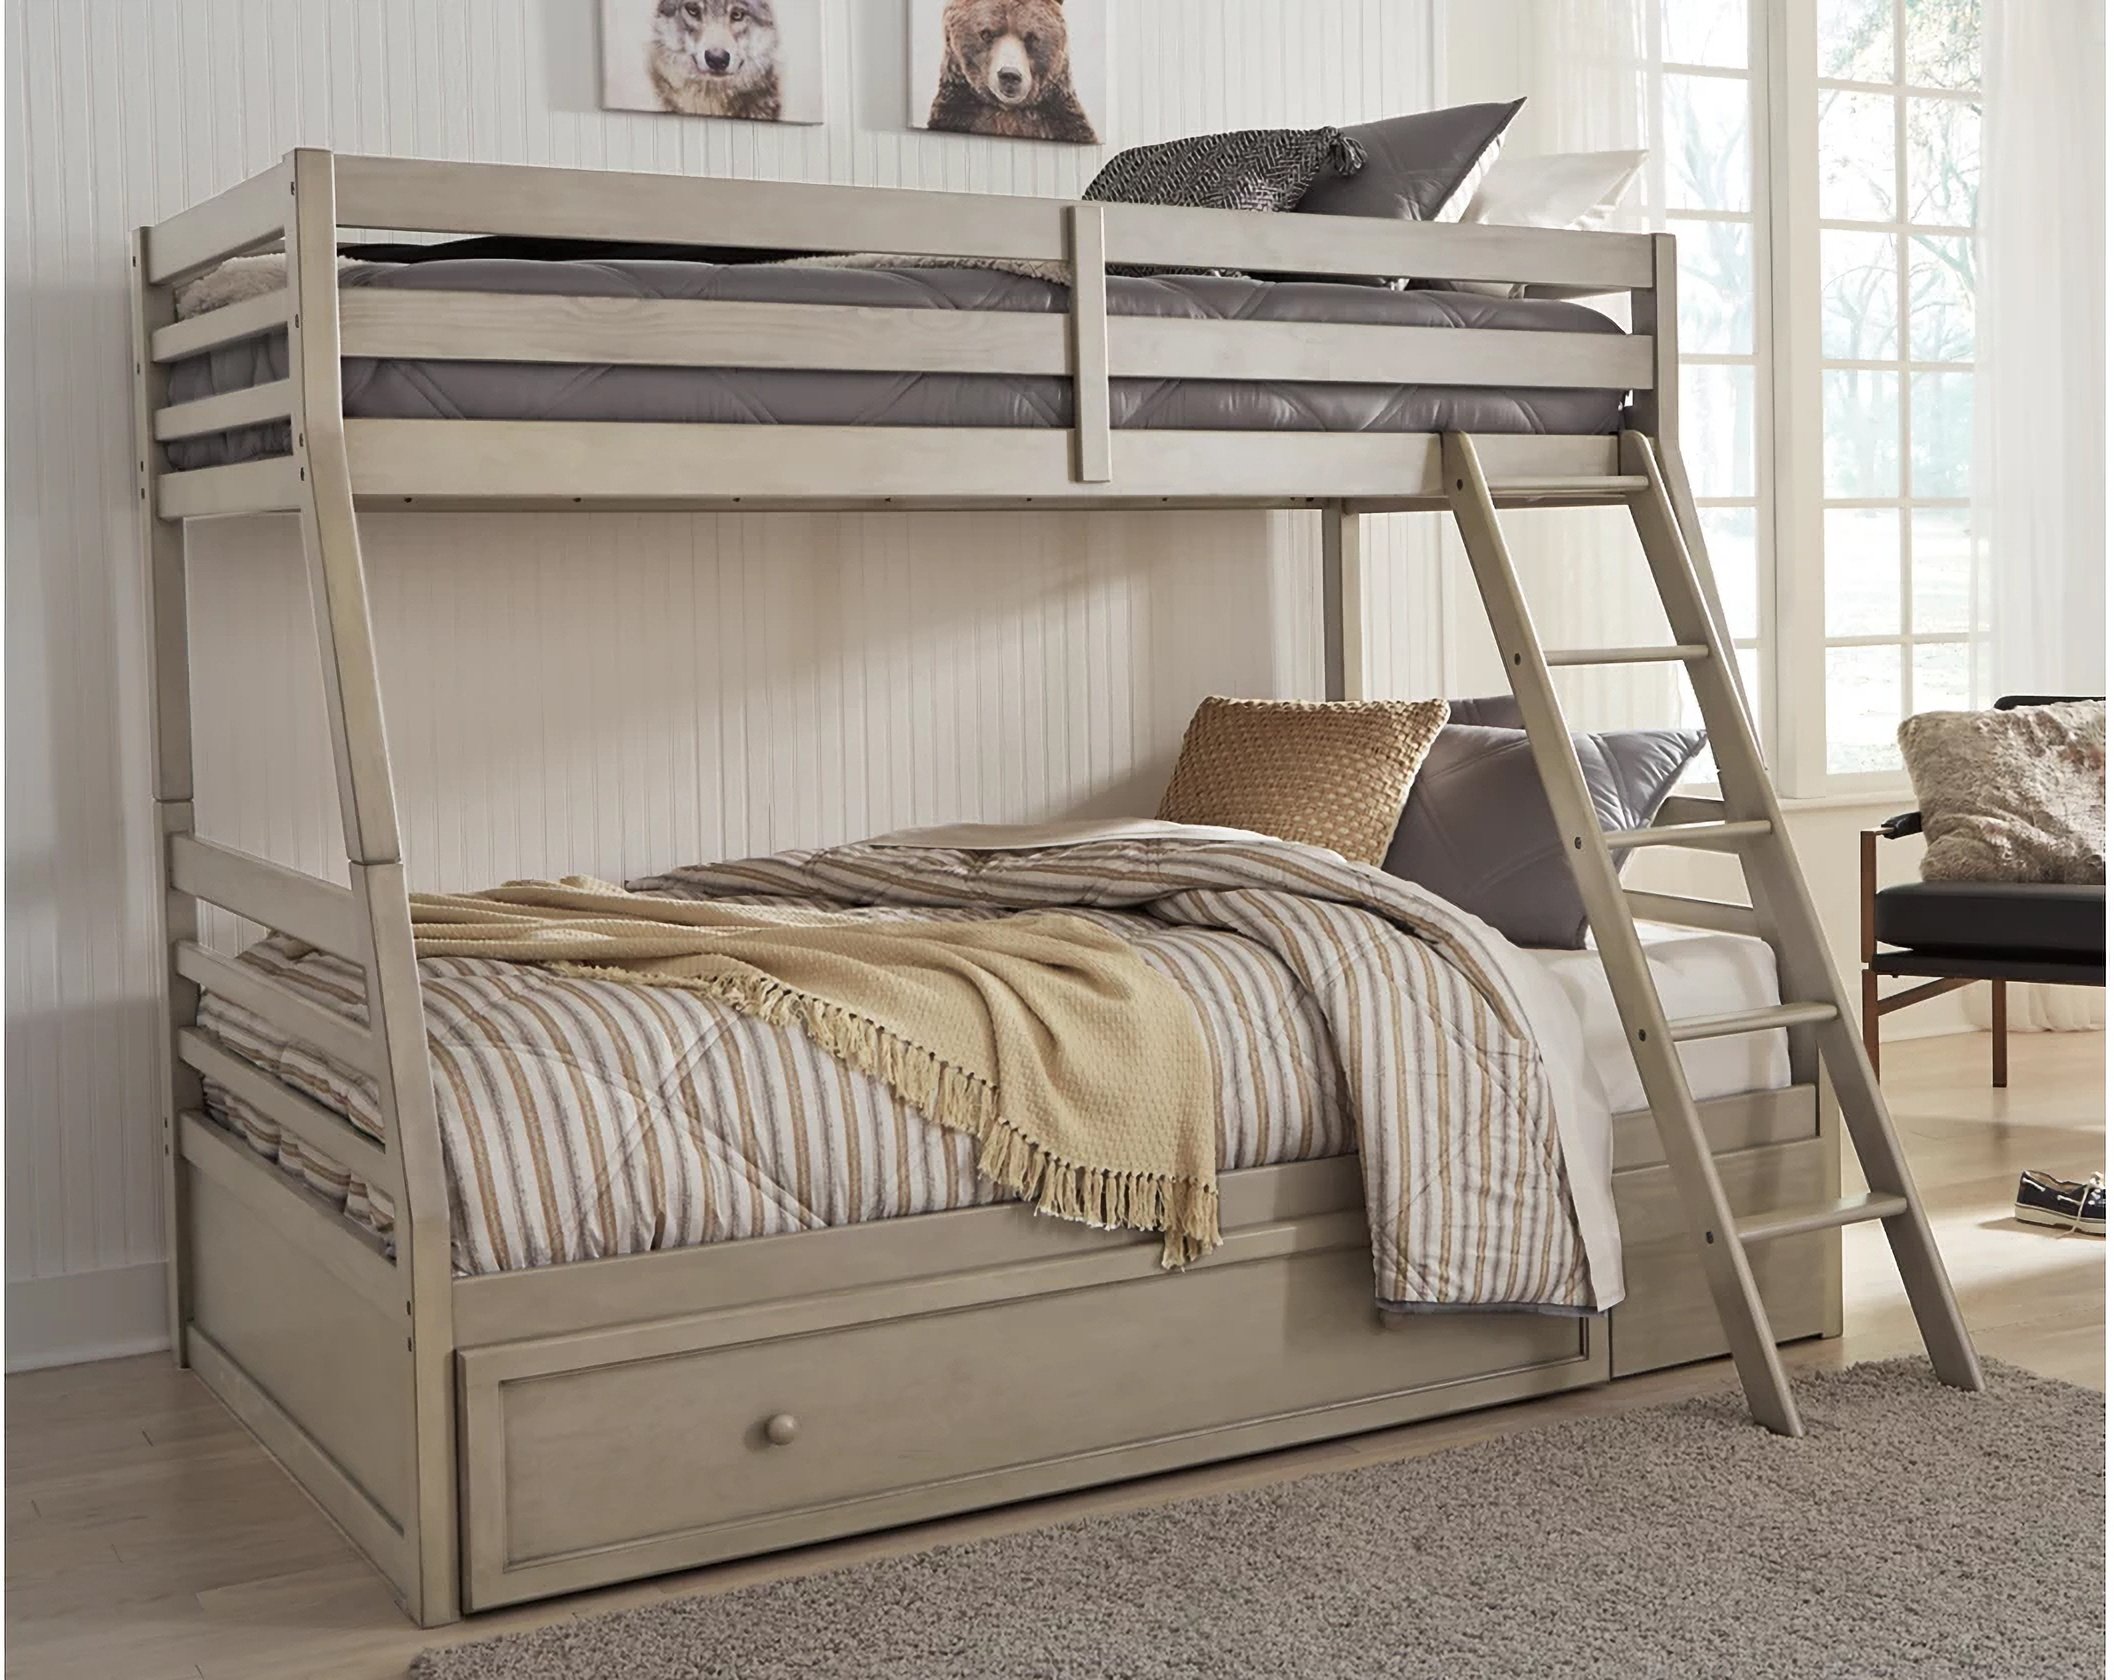 Lettner Light Gray Twin Over Full Bunk, Twin Bed Under $50